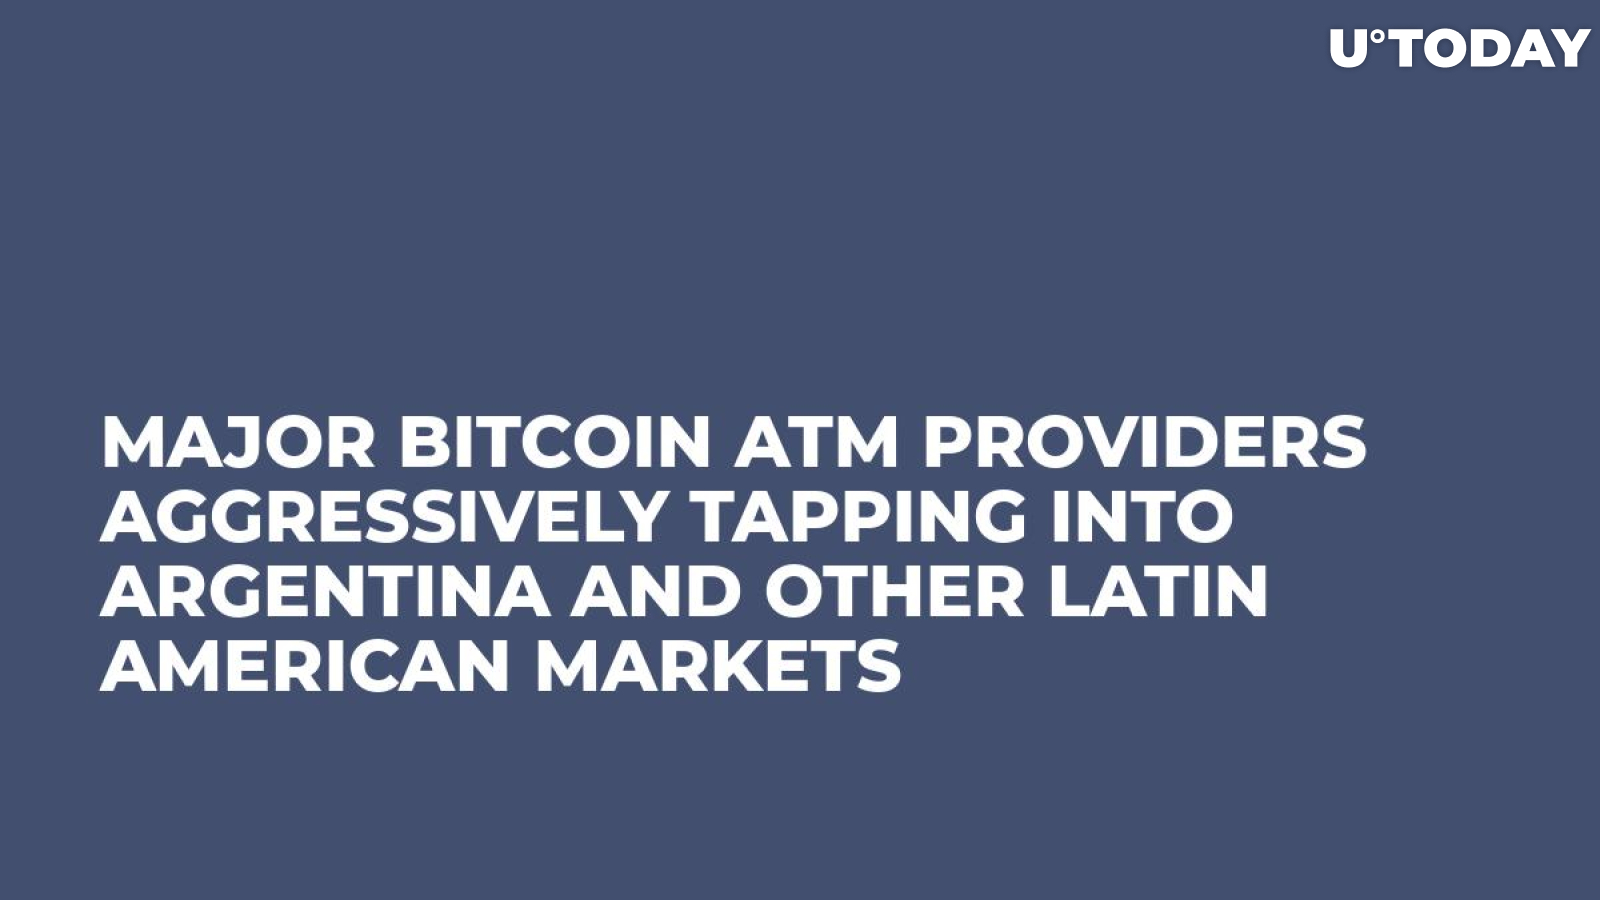 Major Bitcoin ATM Providers Aggressively Tapping Into Argentina and Other Latin American Markets 